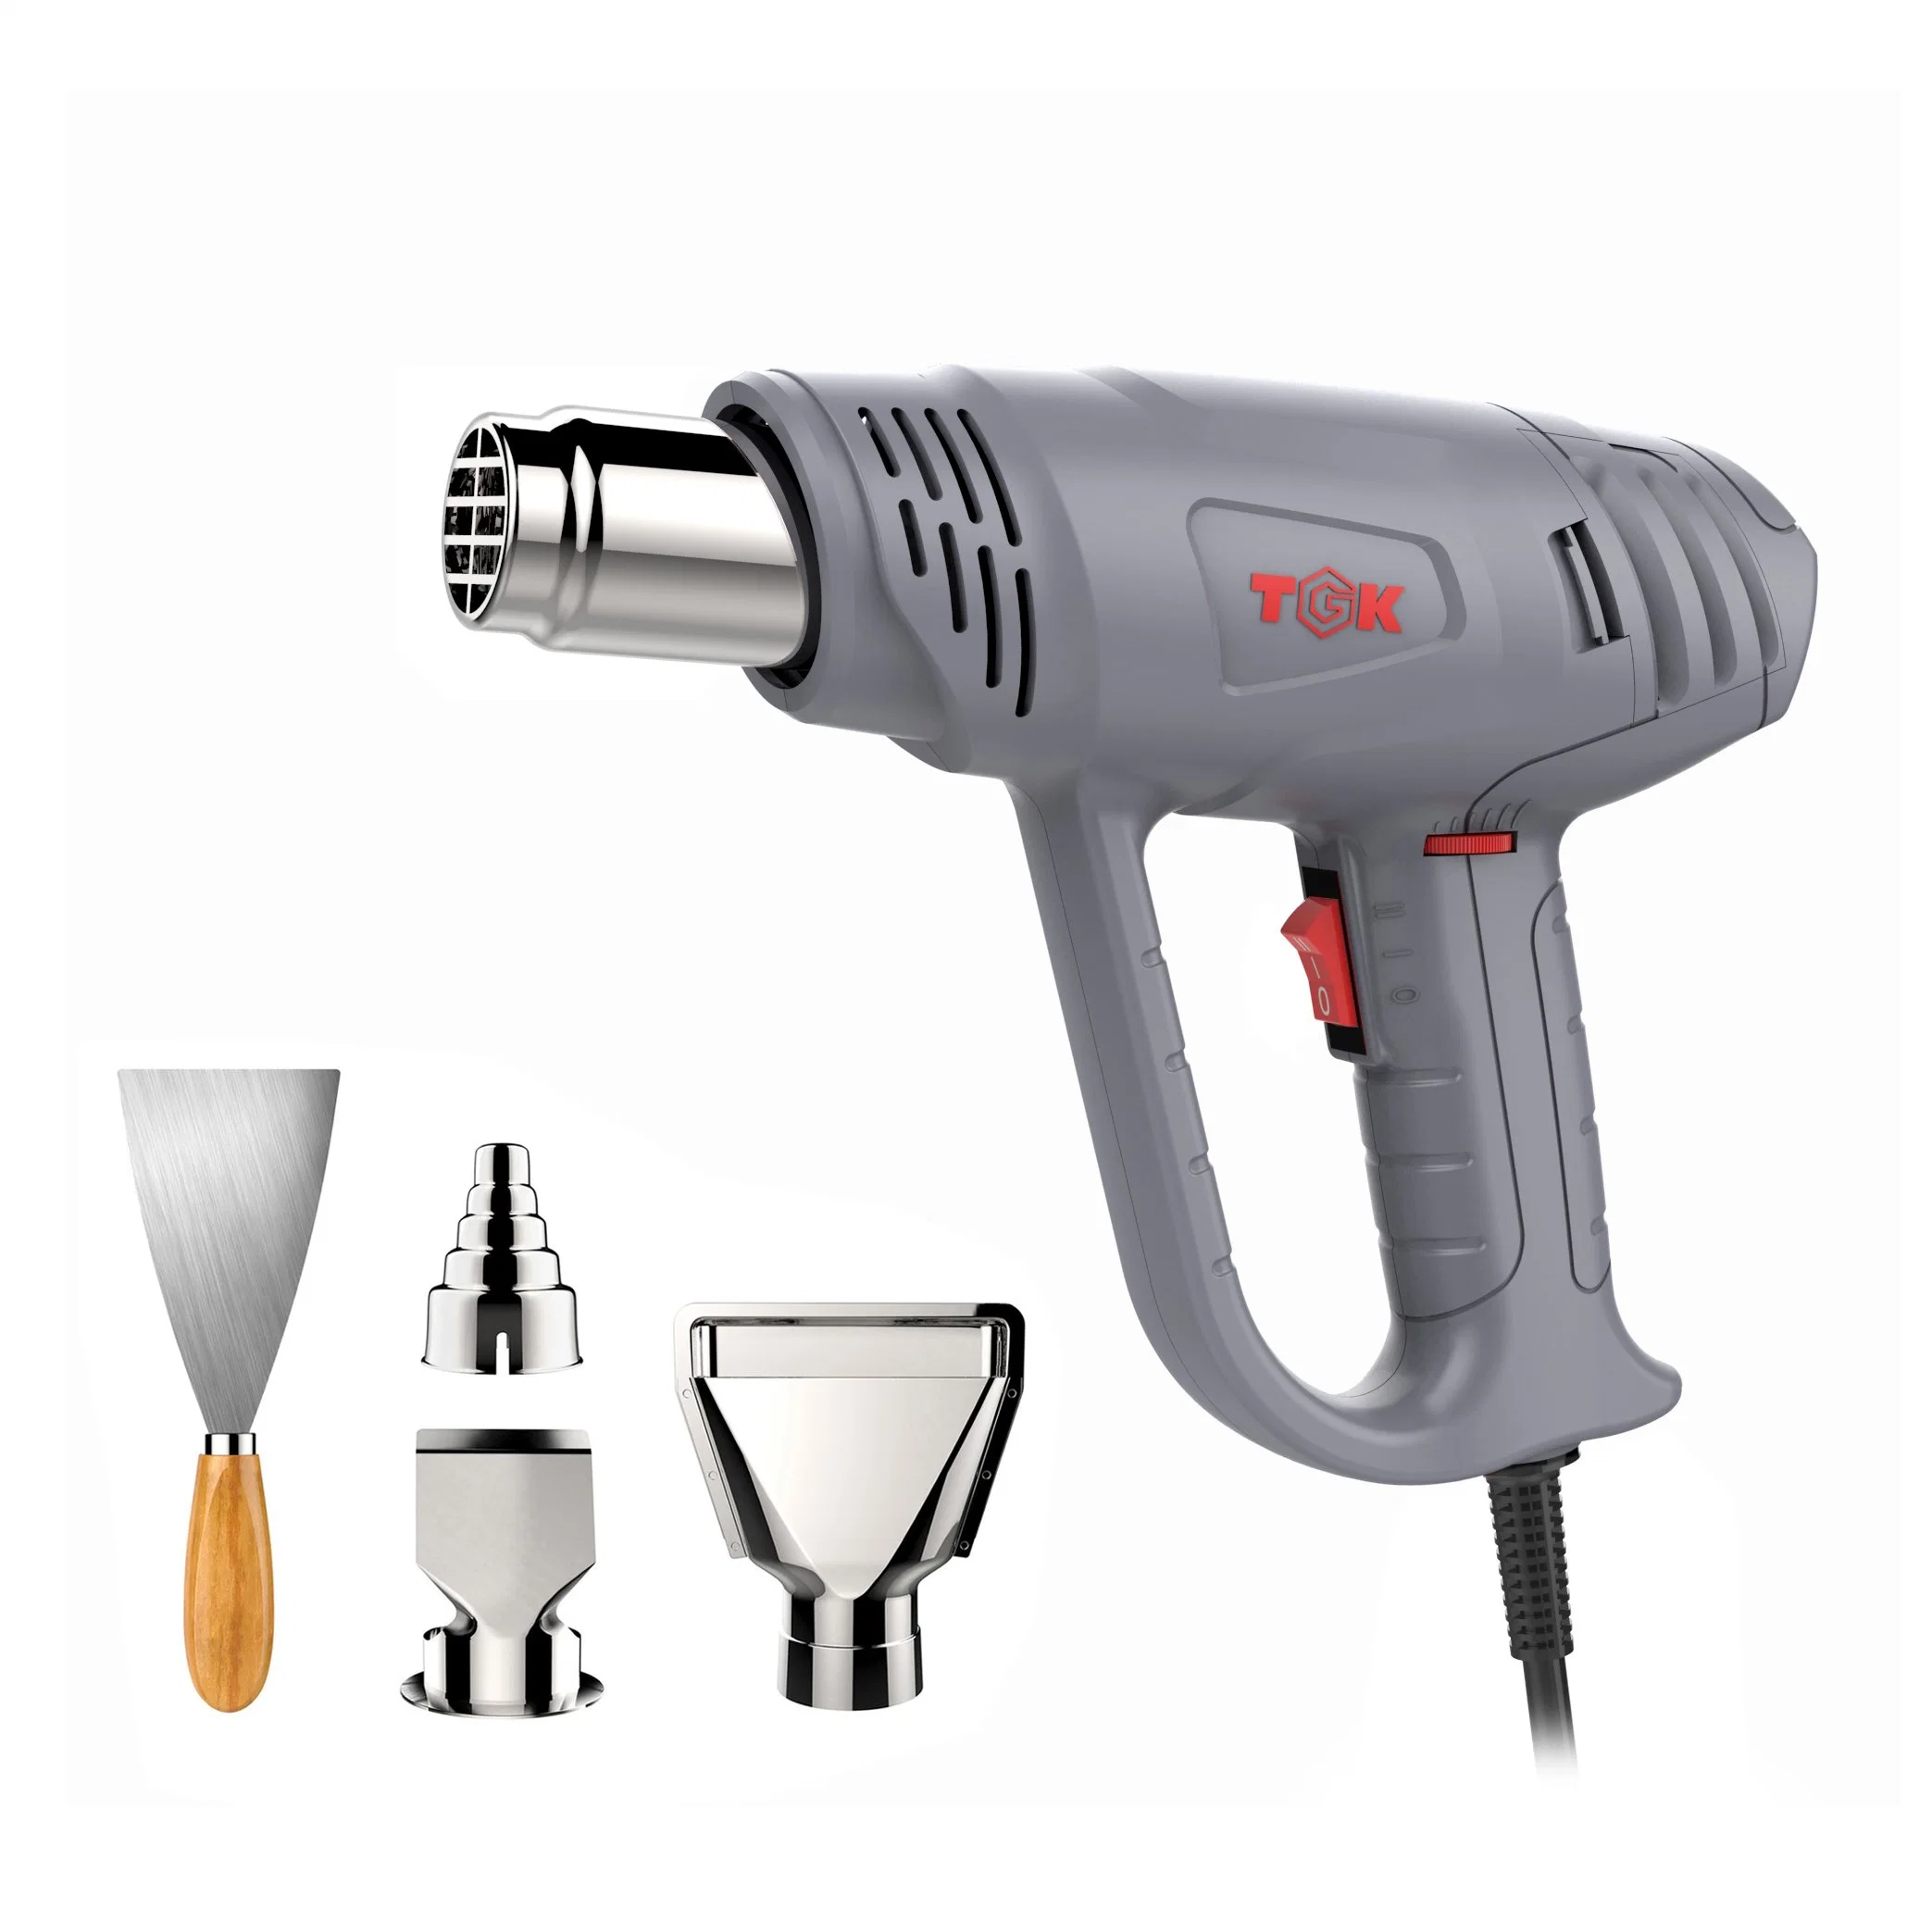 Electric Heat Gun Helps to Finely Heat Embossed Paper Hg5520